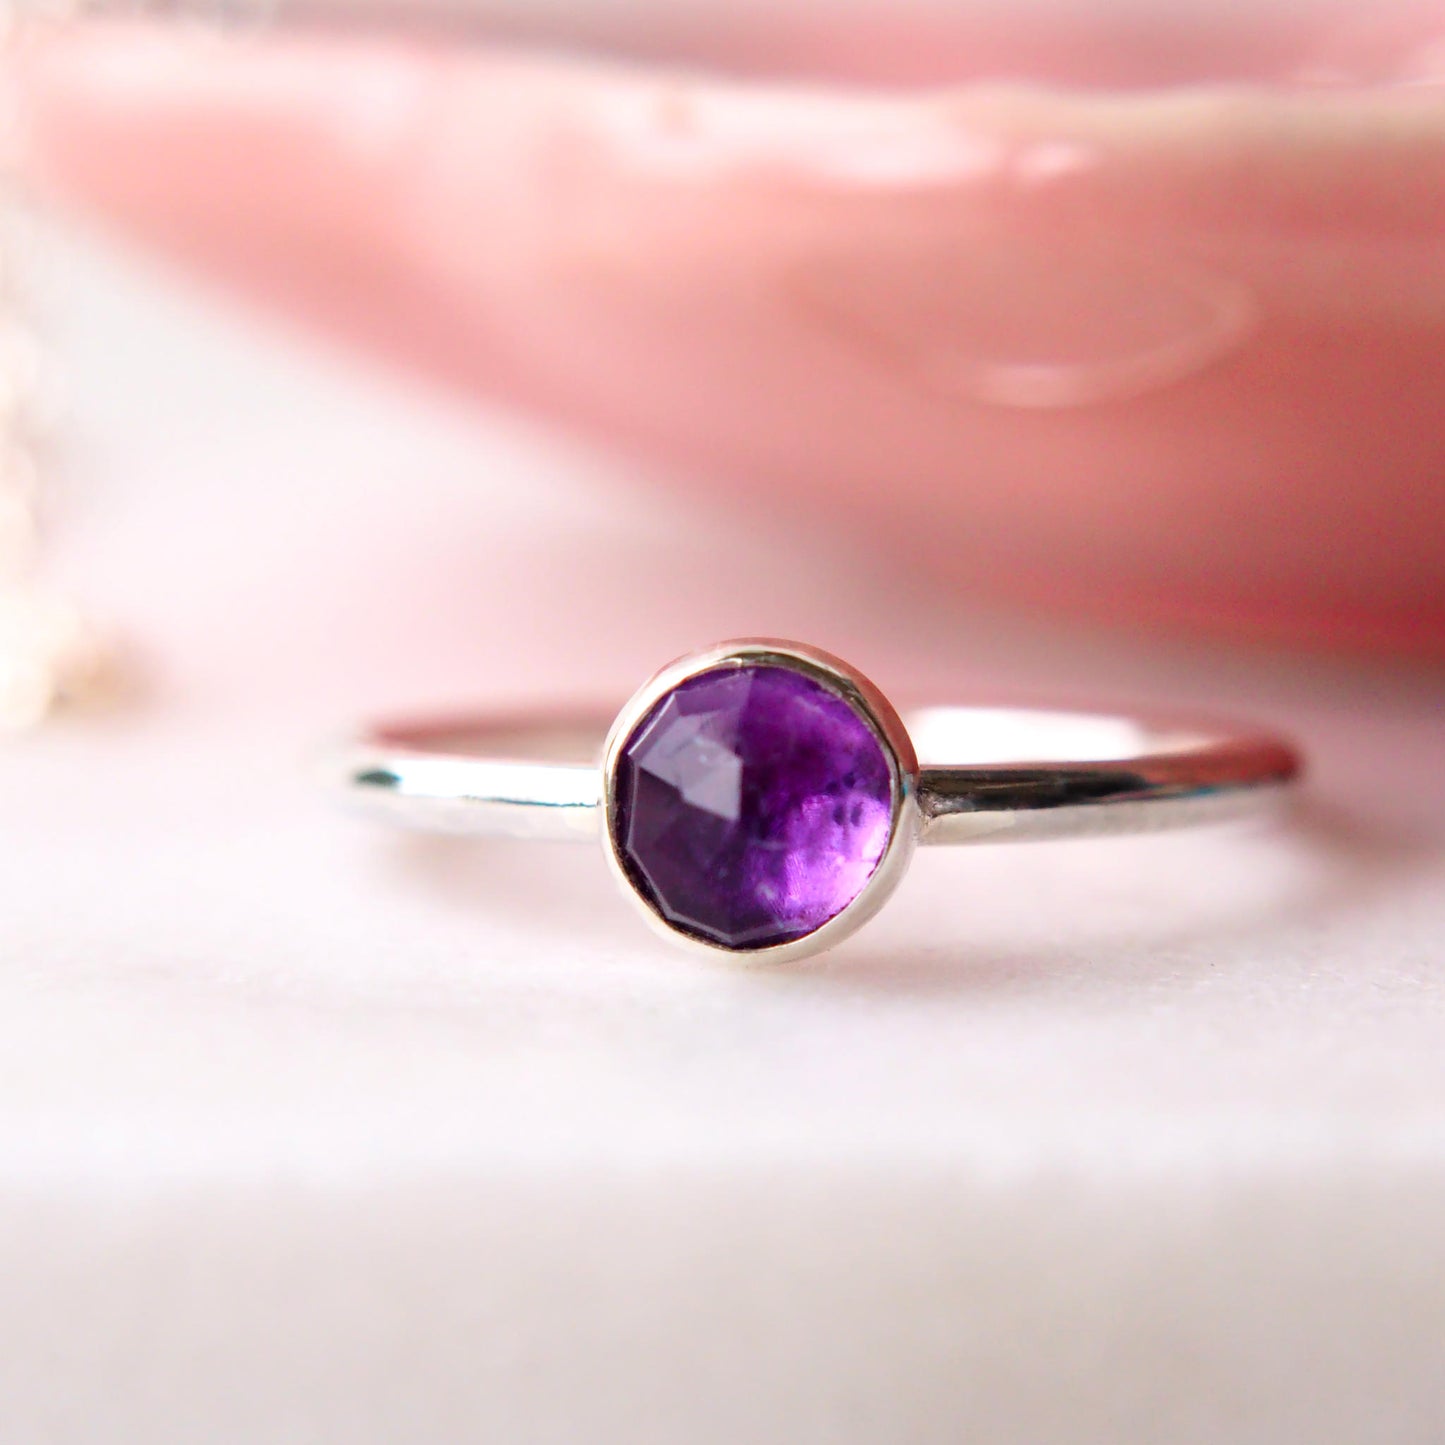 Amethyst ring made from Sterling SIlver and a round 5mm facet cut cabochon Amethyst. Pictured on a white background with a pink trinket dish in the background. Made by Maram Jewellery